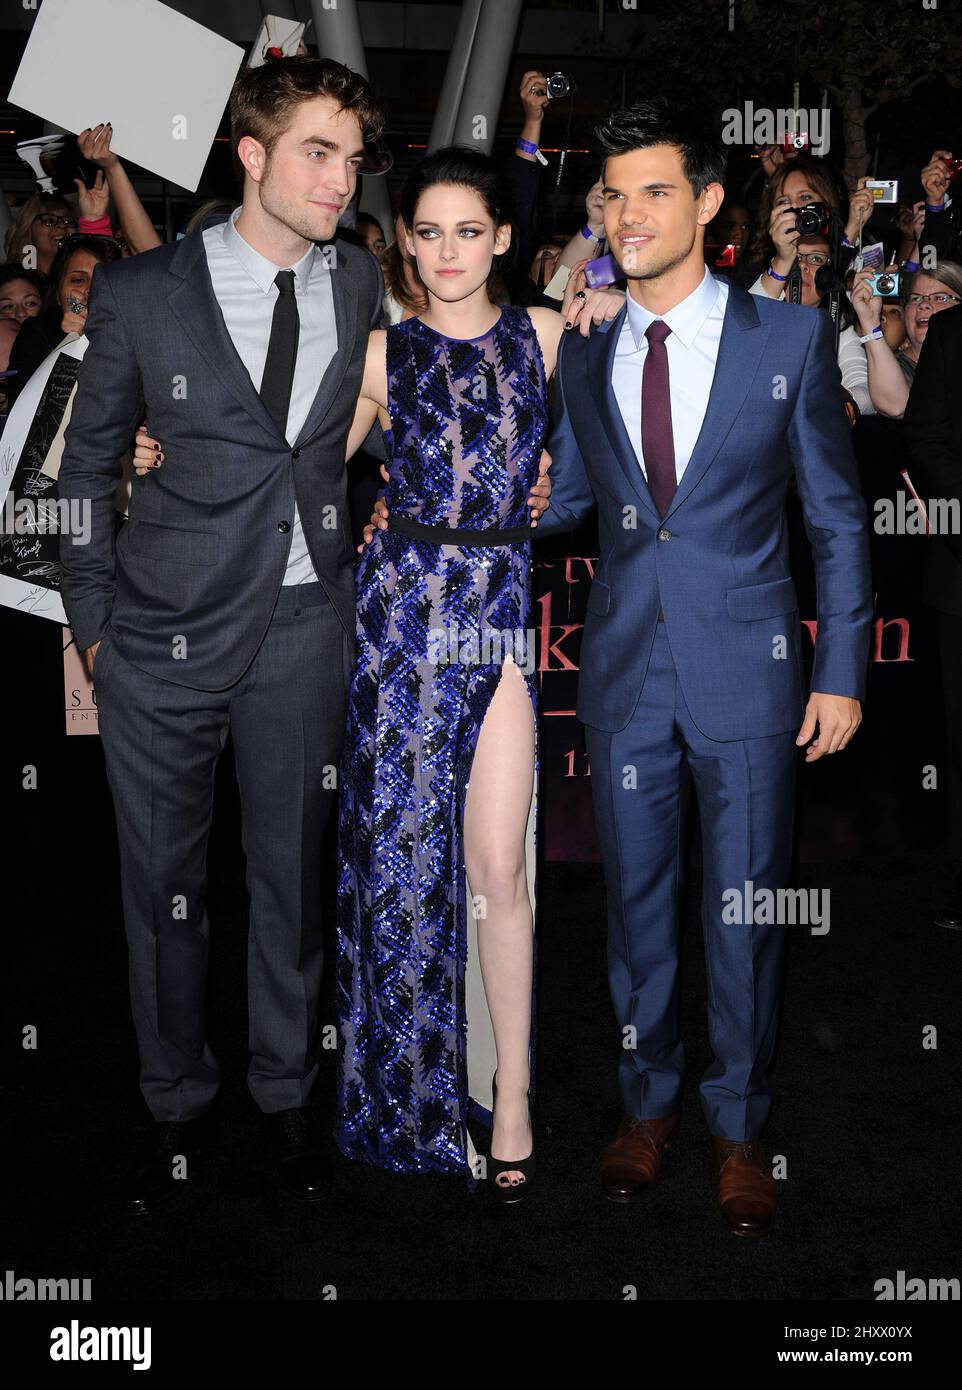 Robert Pattinson, Kristen Stewart and Taylor Lautner arrives at the premiere of 'The Twilight Saga: Breaking Dawn - Part 1' in Los Angeles, USA. Stock Photo